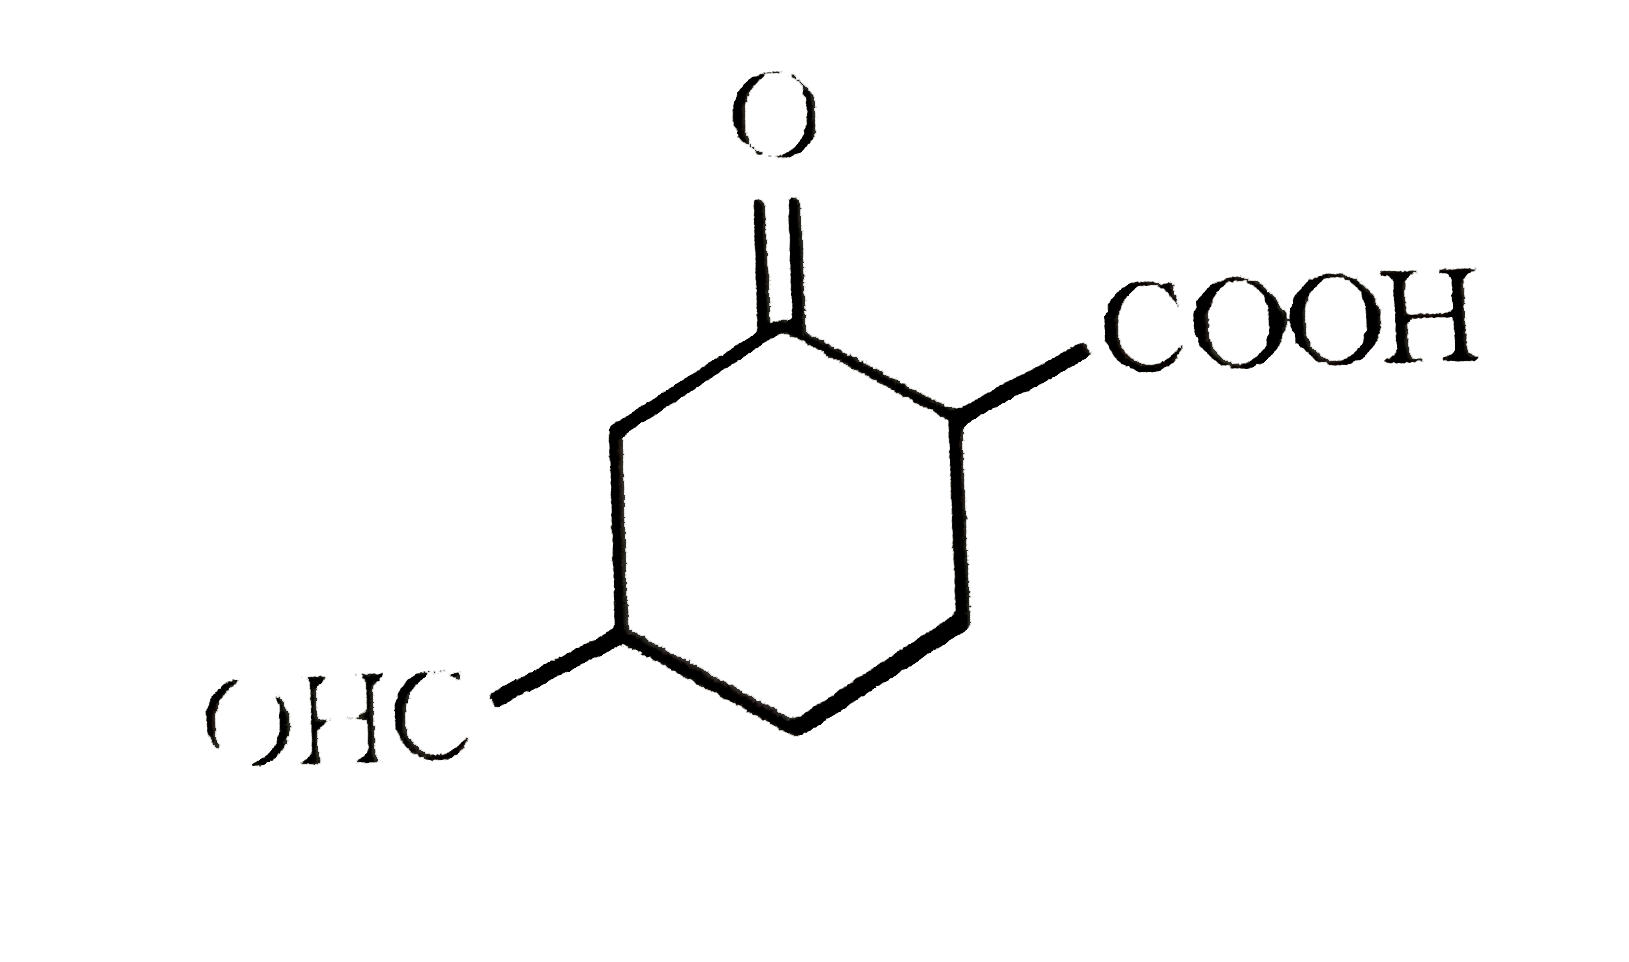 The correct IUPAC name of the compound